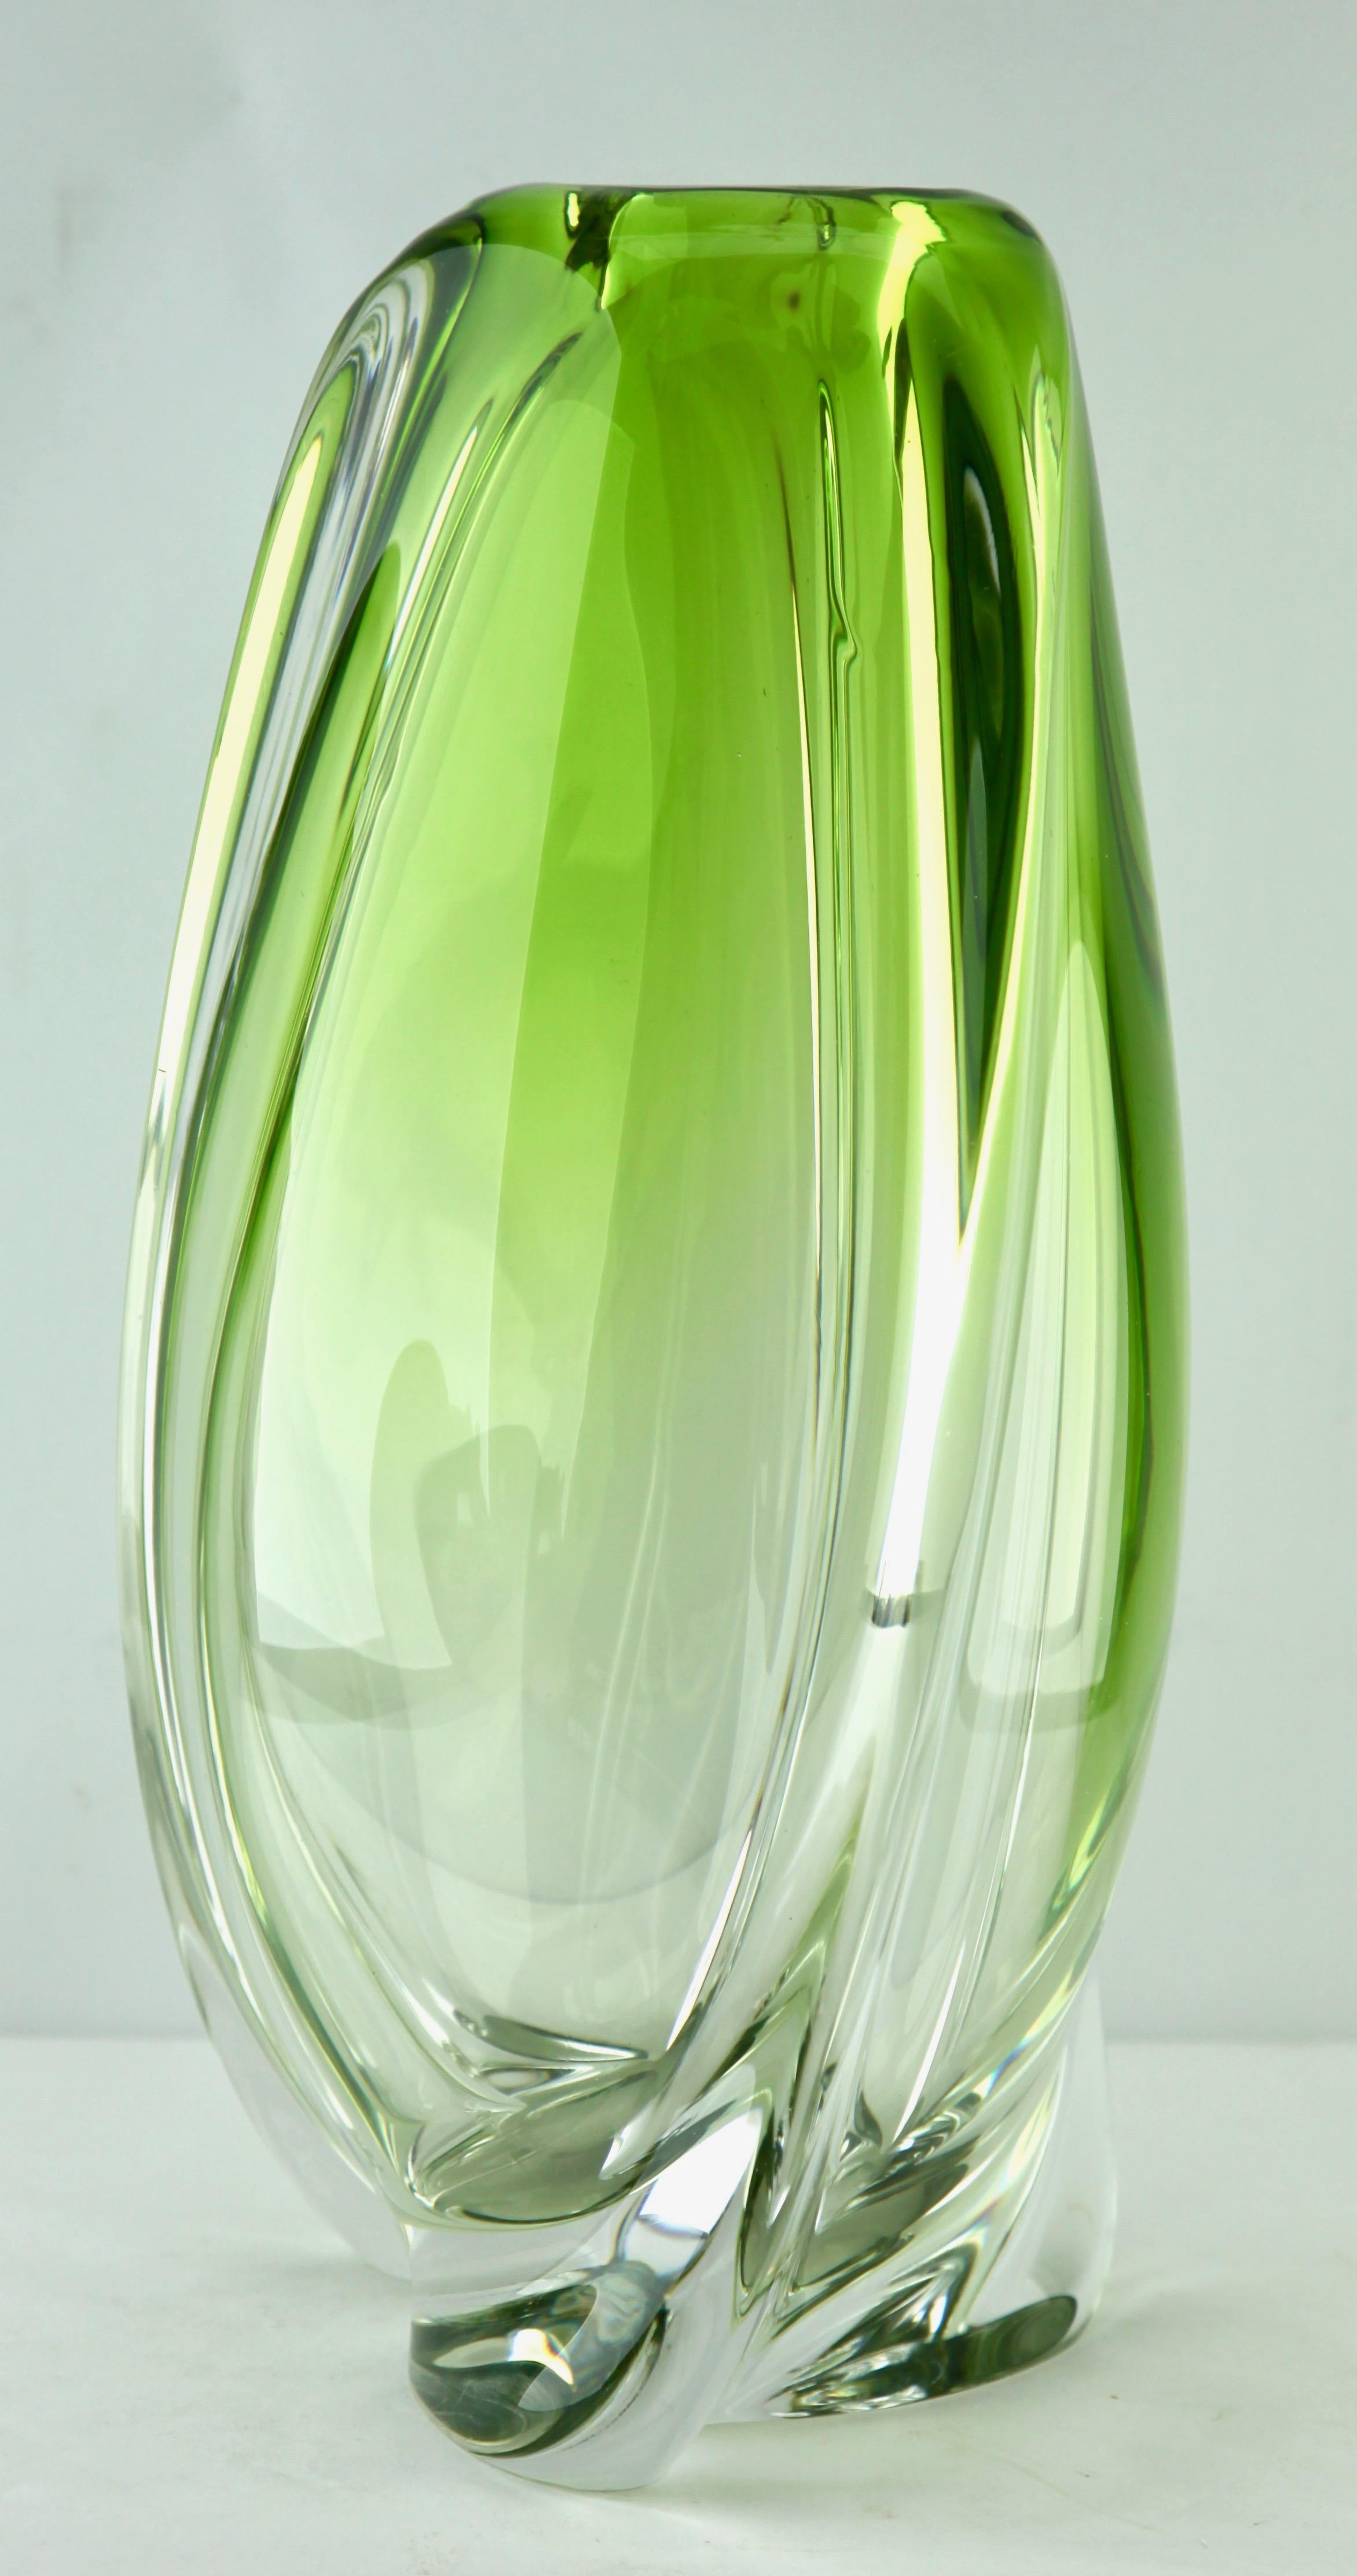 Heavy Val Saint Lambert crystal vase signed, catalogued in the 1950s.
The central Green color (a traditional favorite for VSL) has been given a thick Sommerso (clear layer on the outside) and sculpted with subtle curves by the master craftsmen at